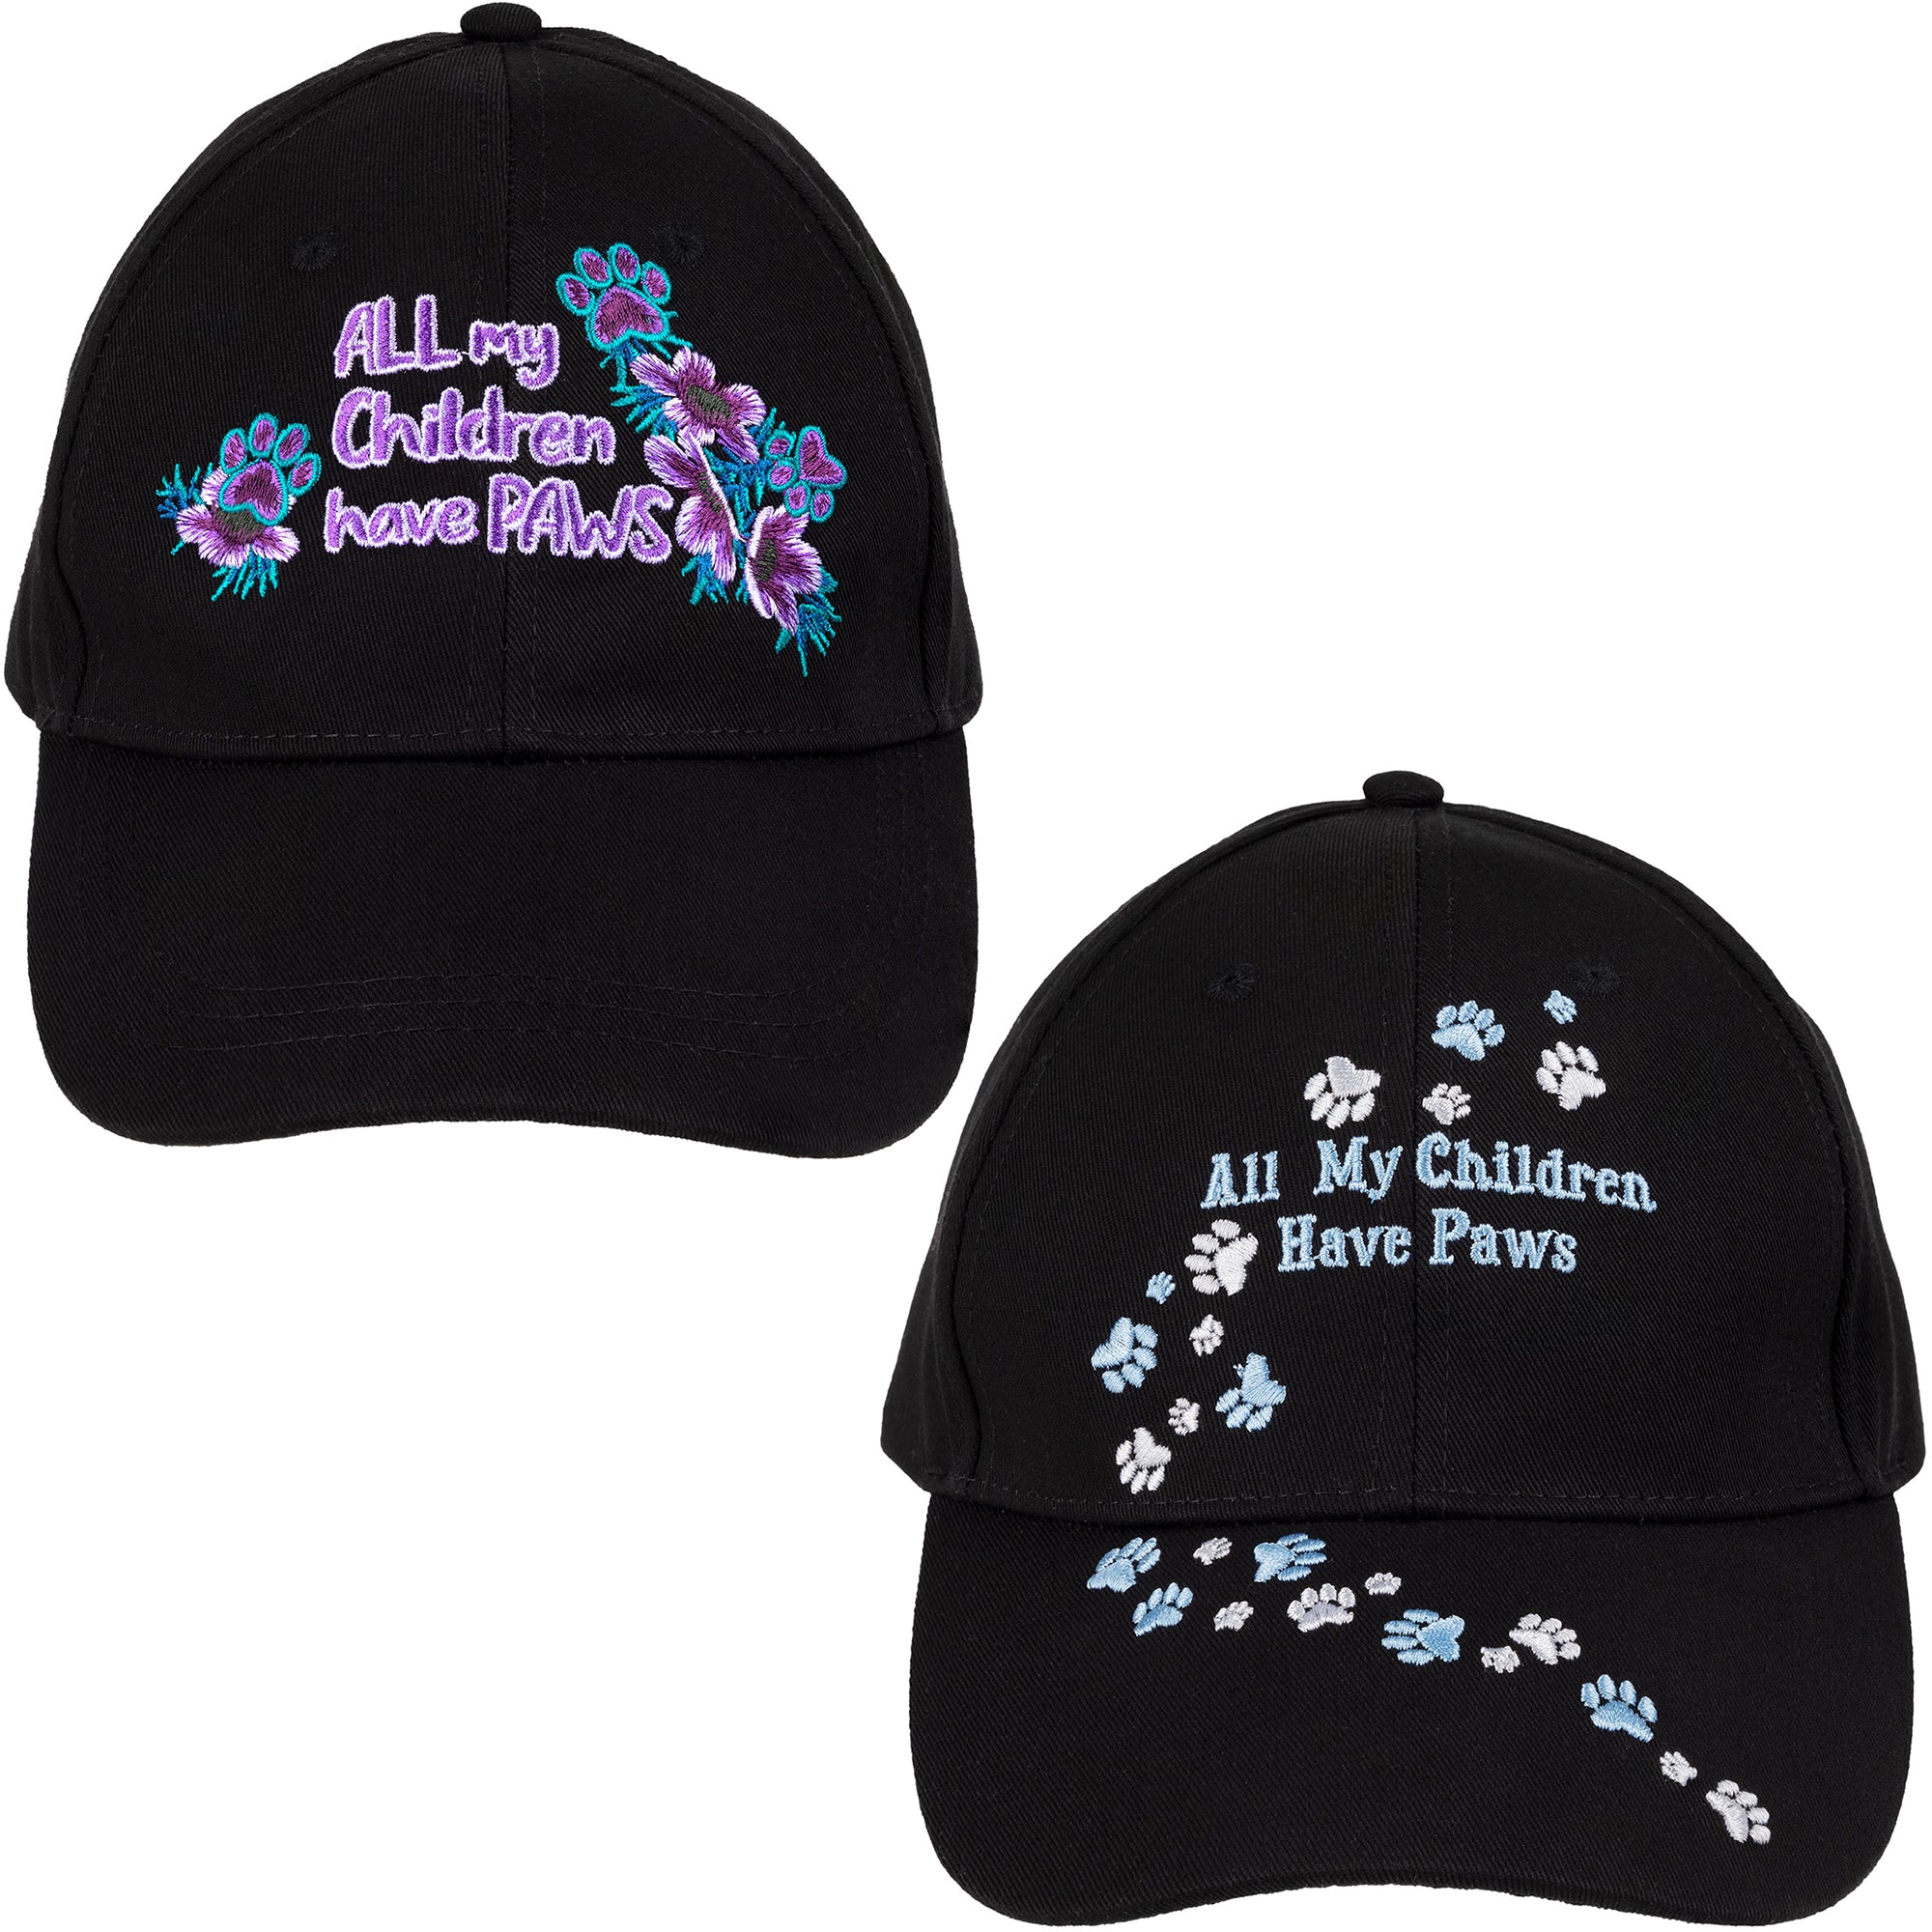 All My Children Have Paws Embroidered Baseball Hat - Multicolor